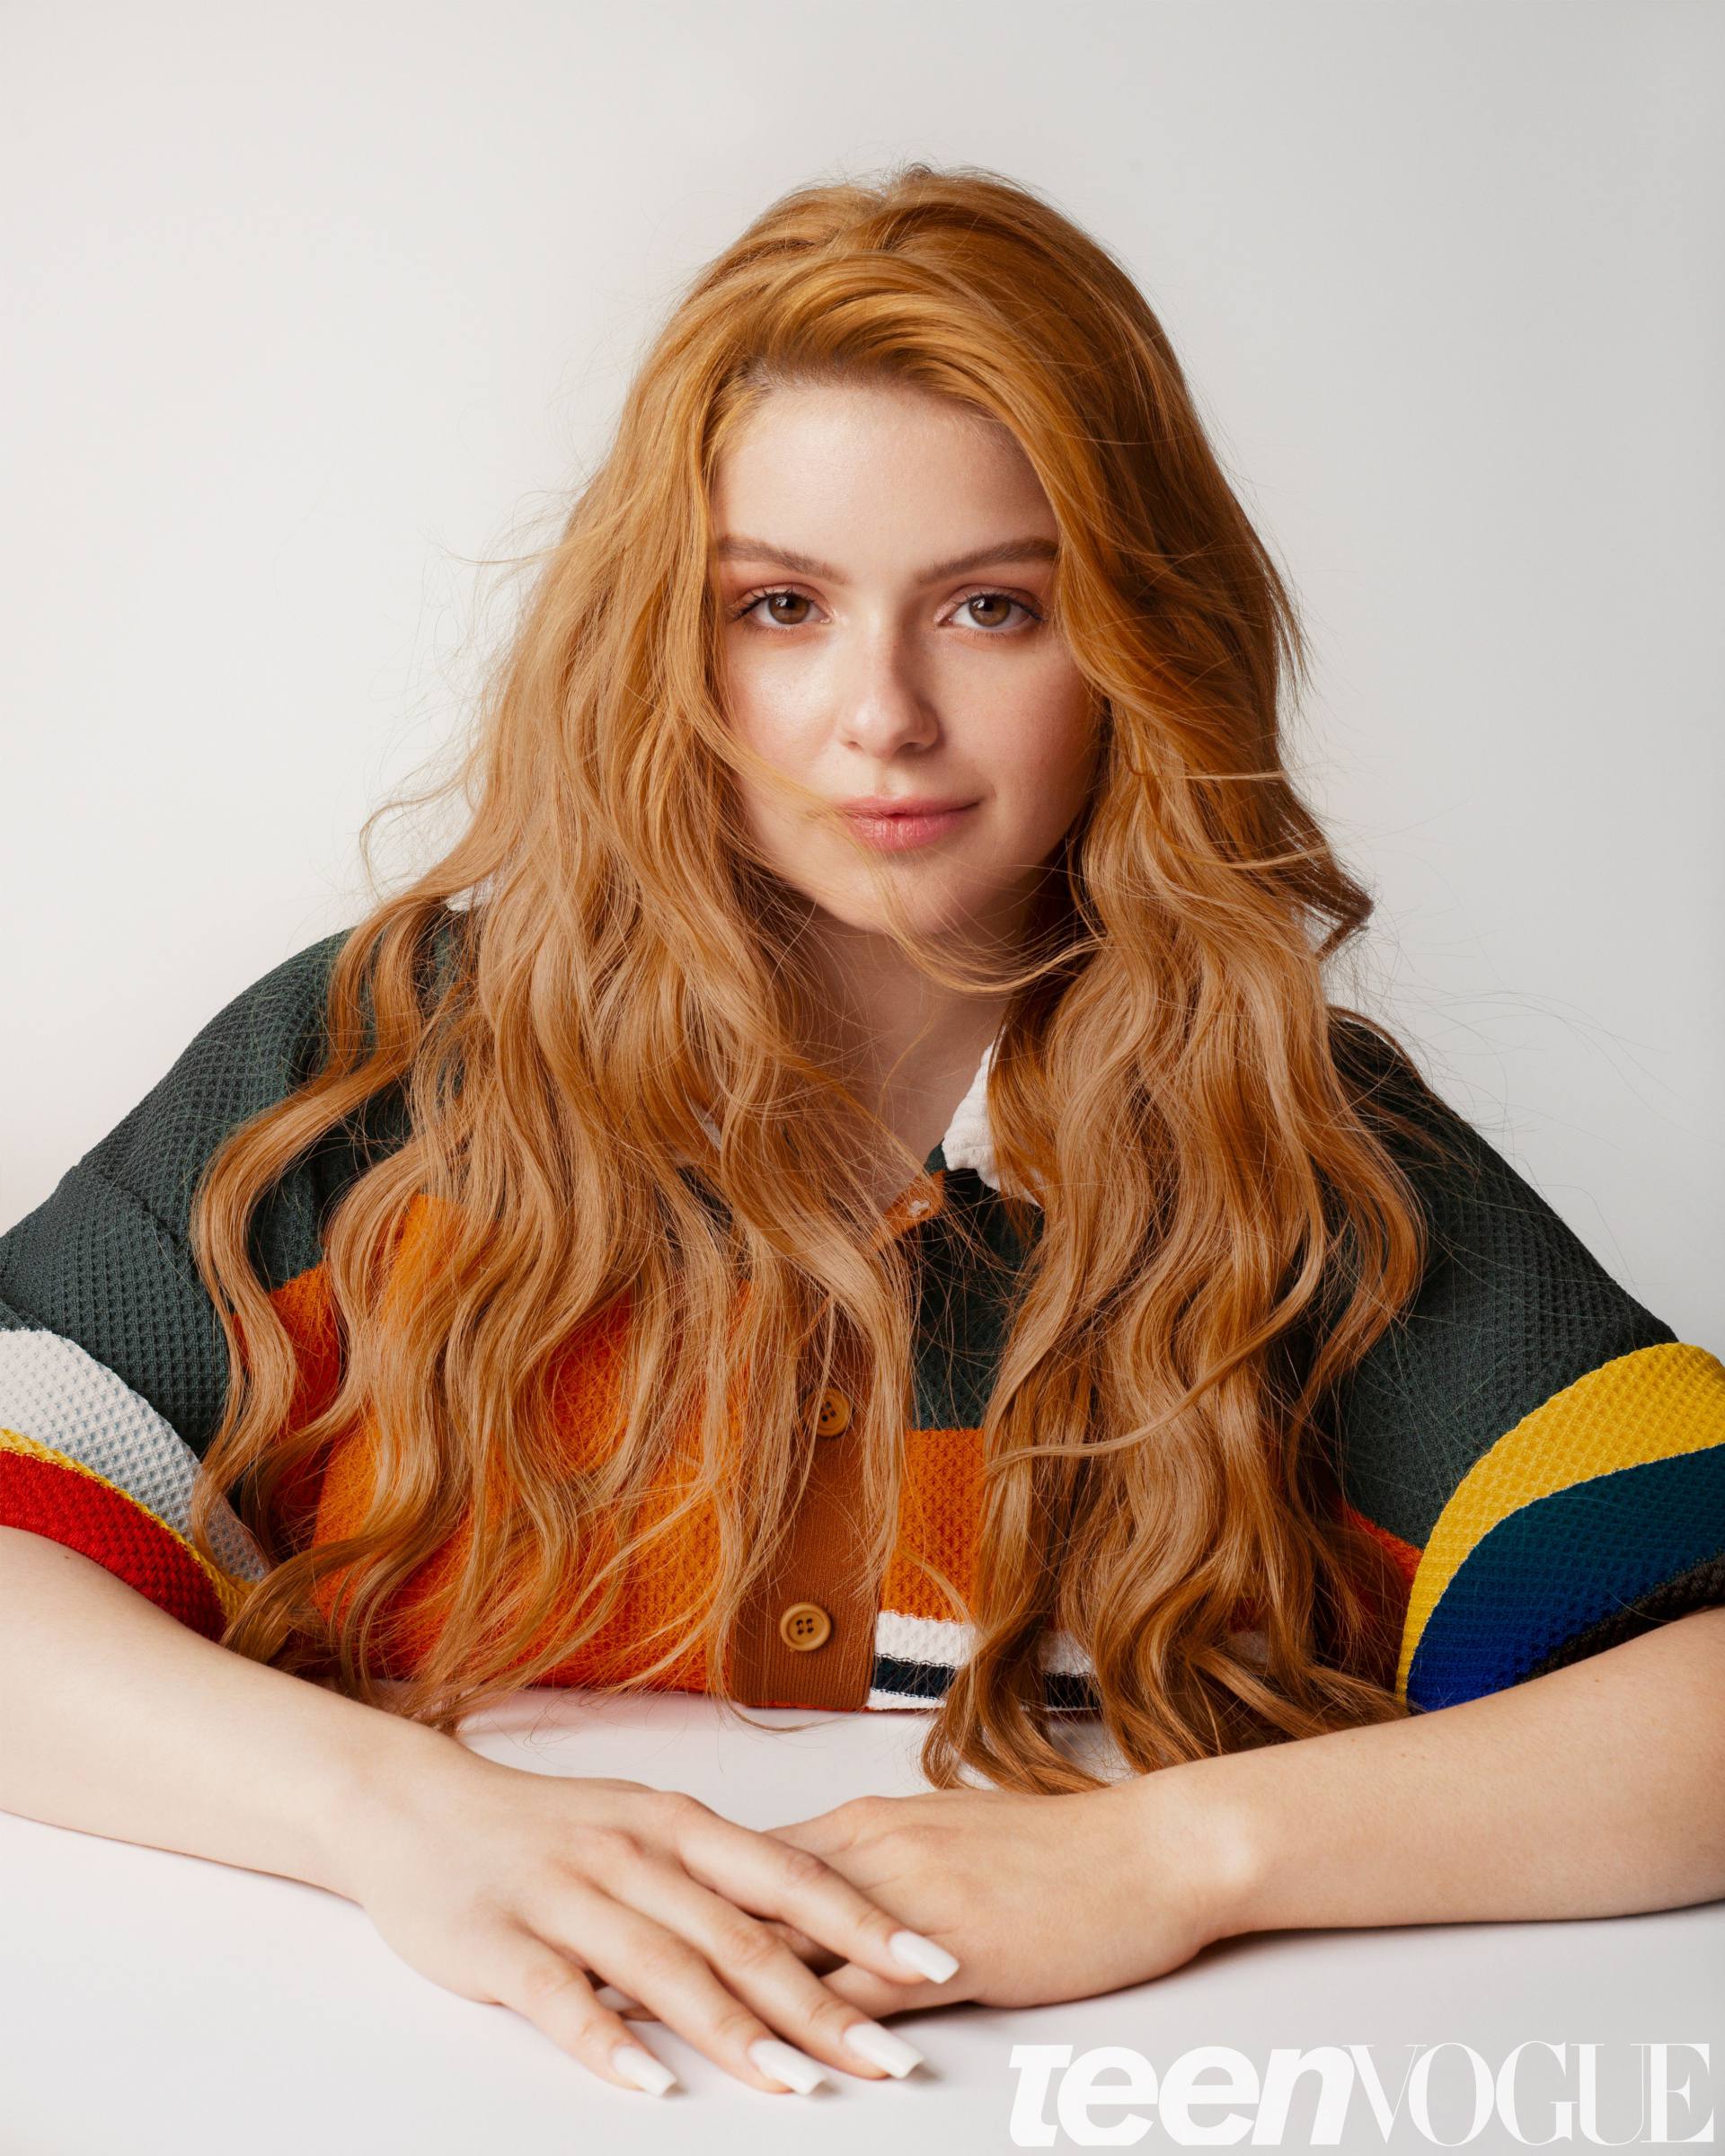 Ariel Winter Beautiful As Redhead In Photoshoot For Teen Vogue Magazine 0001